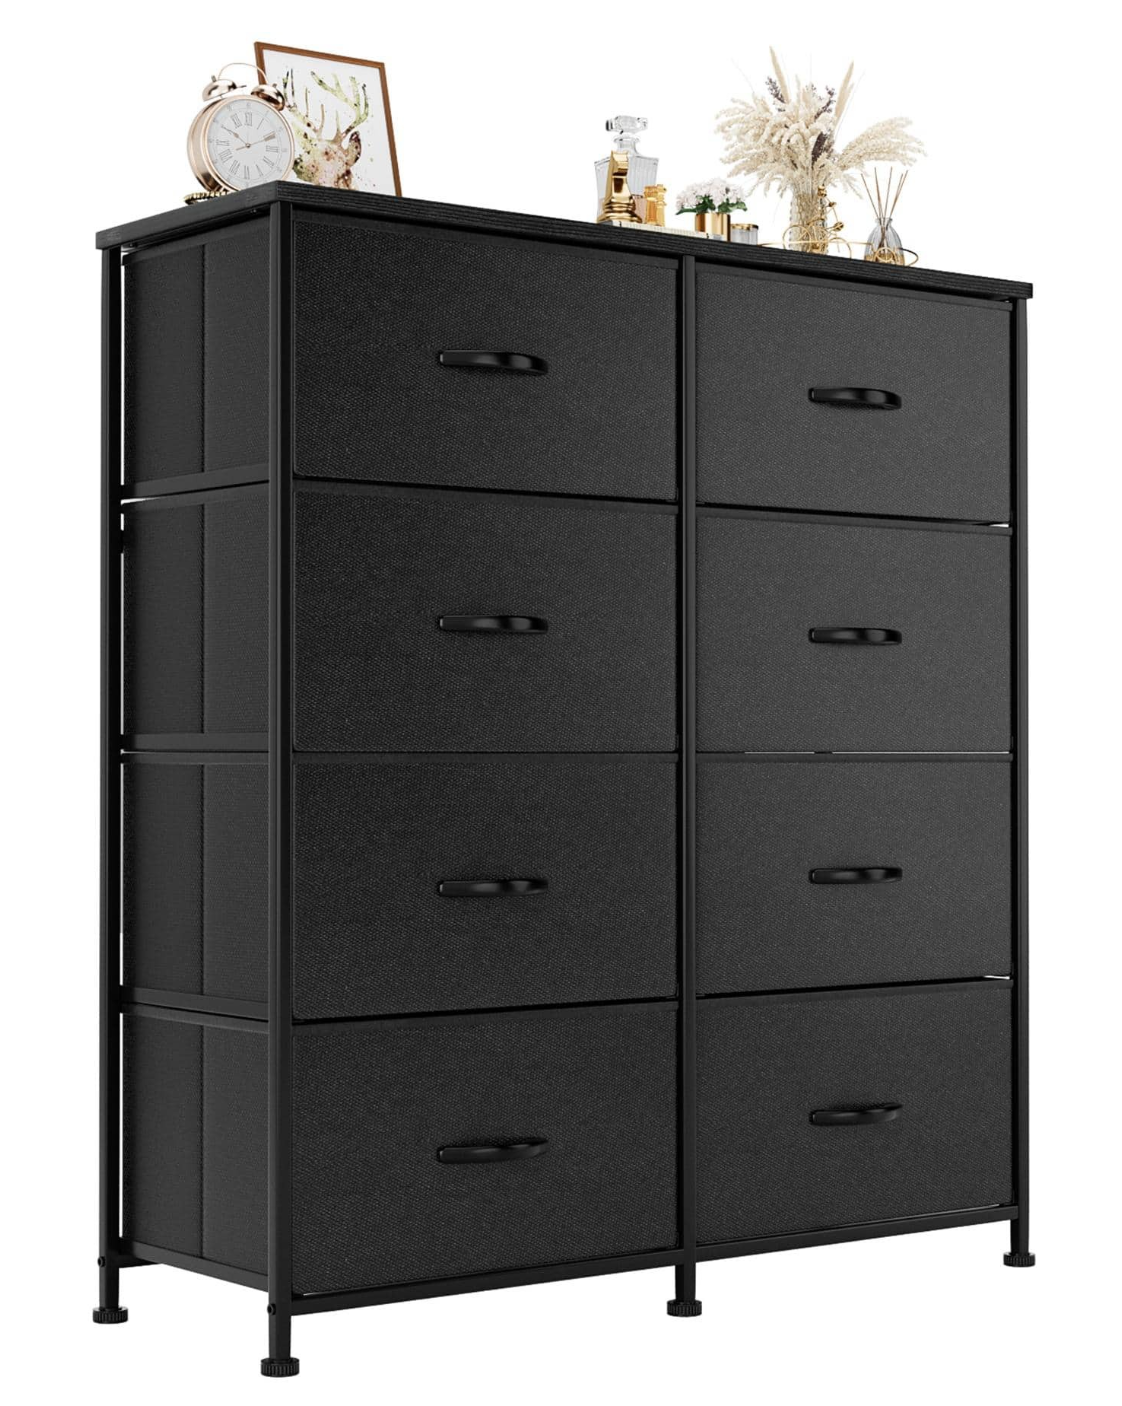 Chic Organization Bliss: Furmax Fabric Dresser - 8 Drawer Tall Tower with Stylish Fabric Bins for Bedroom, Closet, and Beyond in Sleek Black Design!